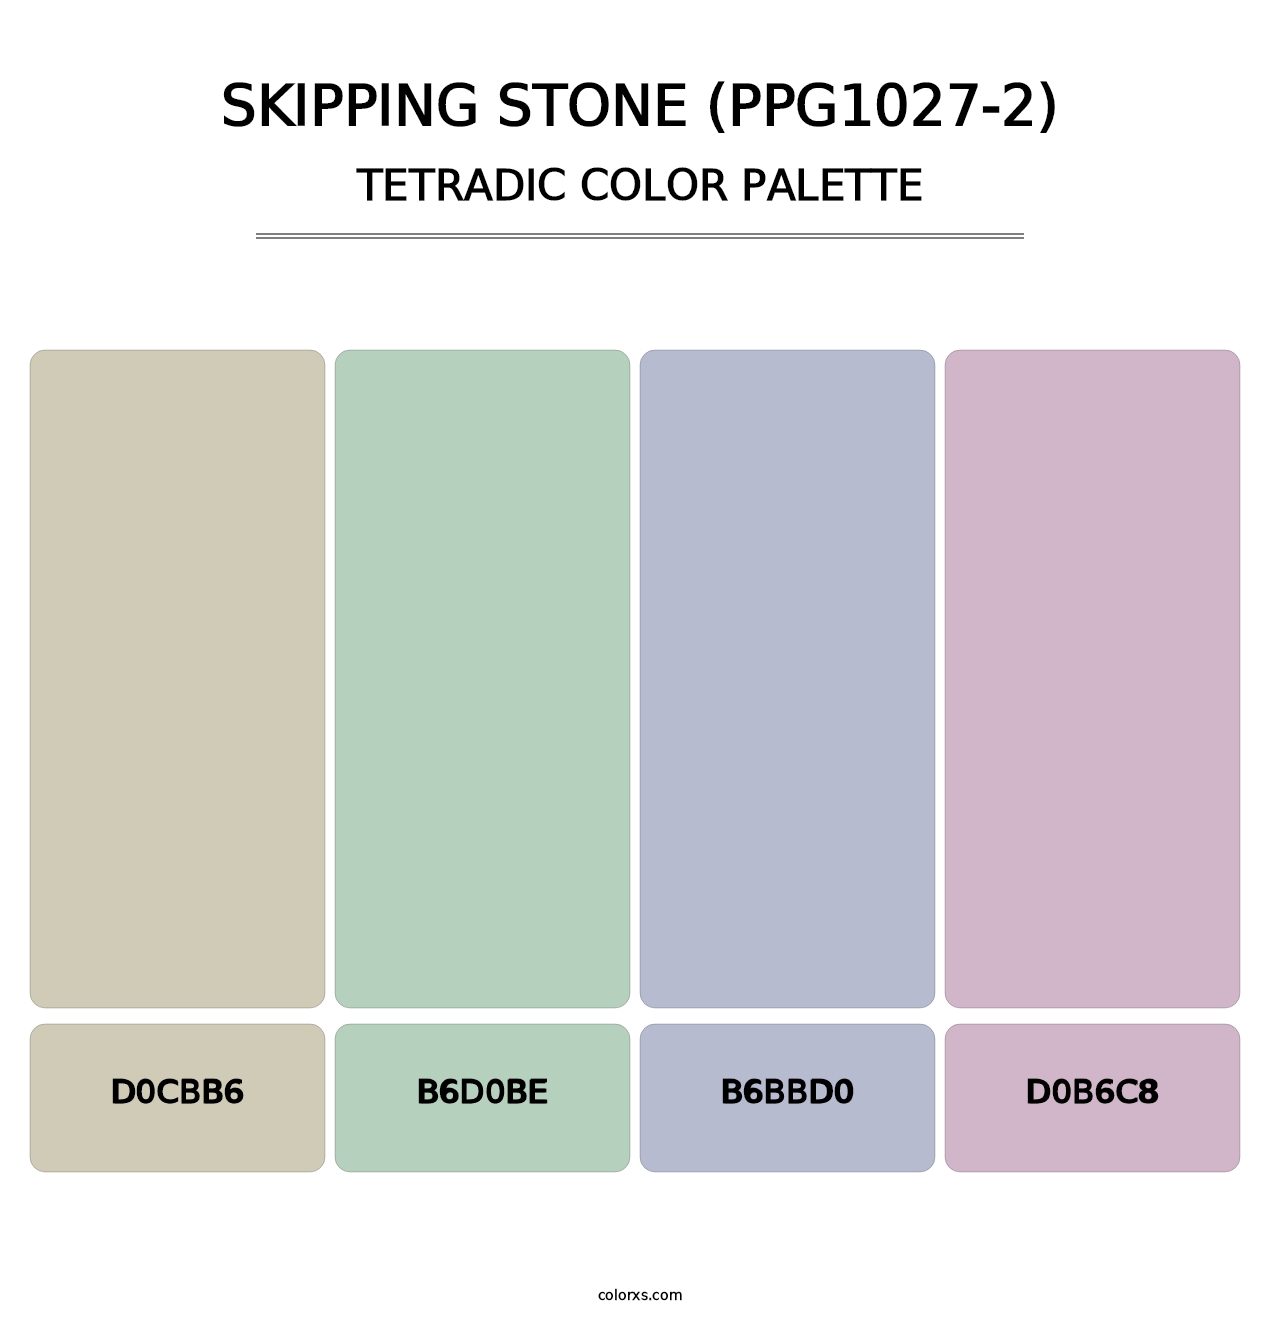 Skipping Stone (PPG1027-2) - Tetradic Color Palette